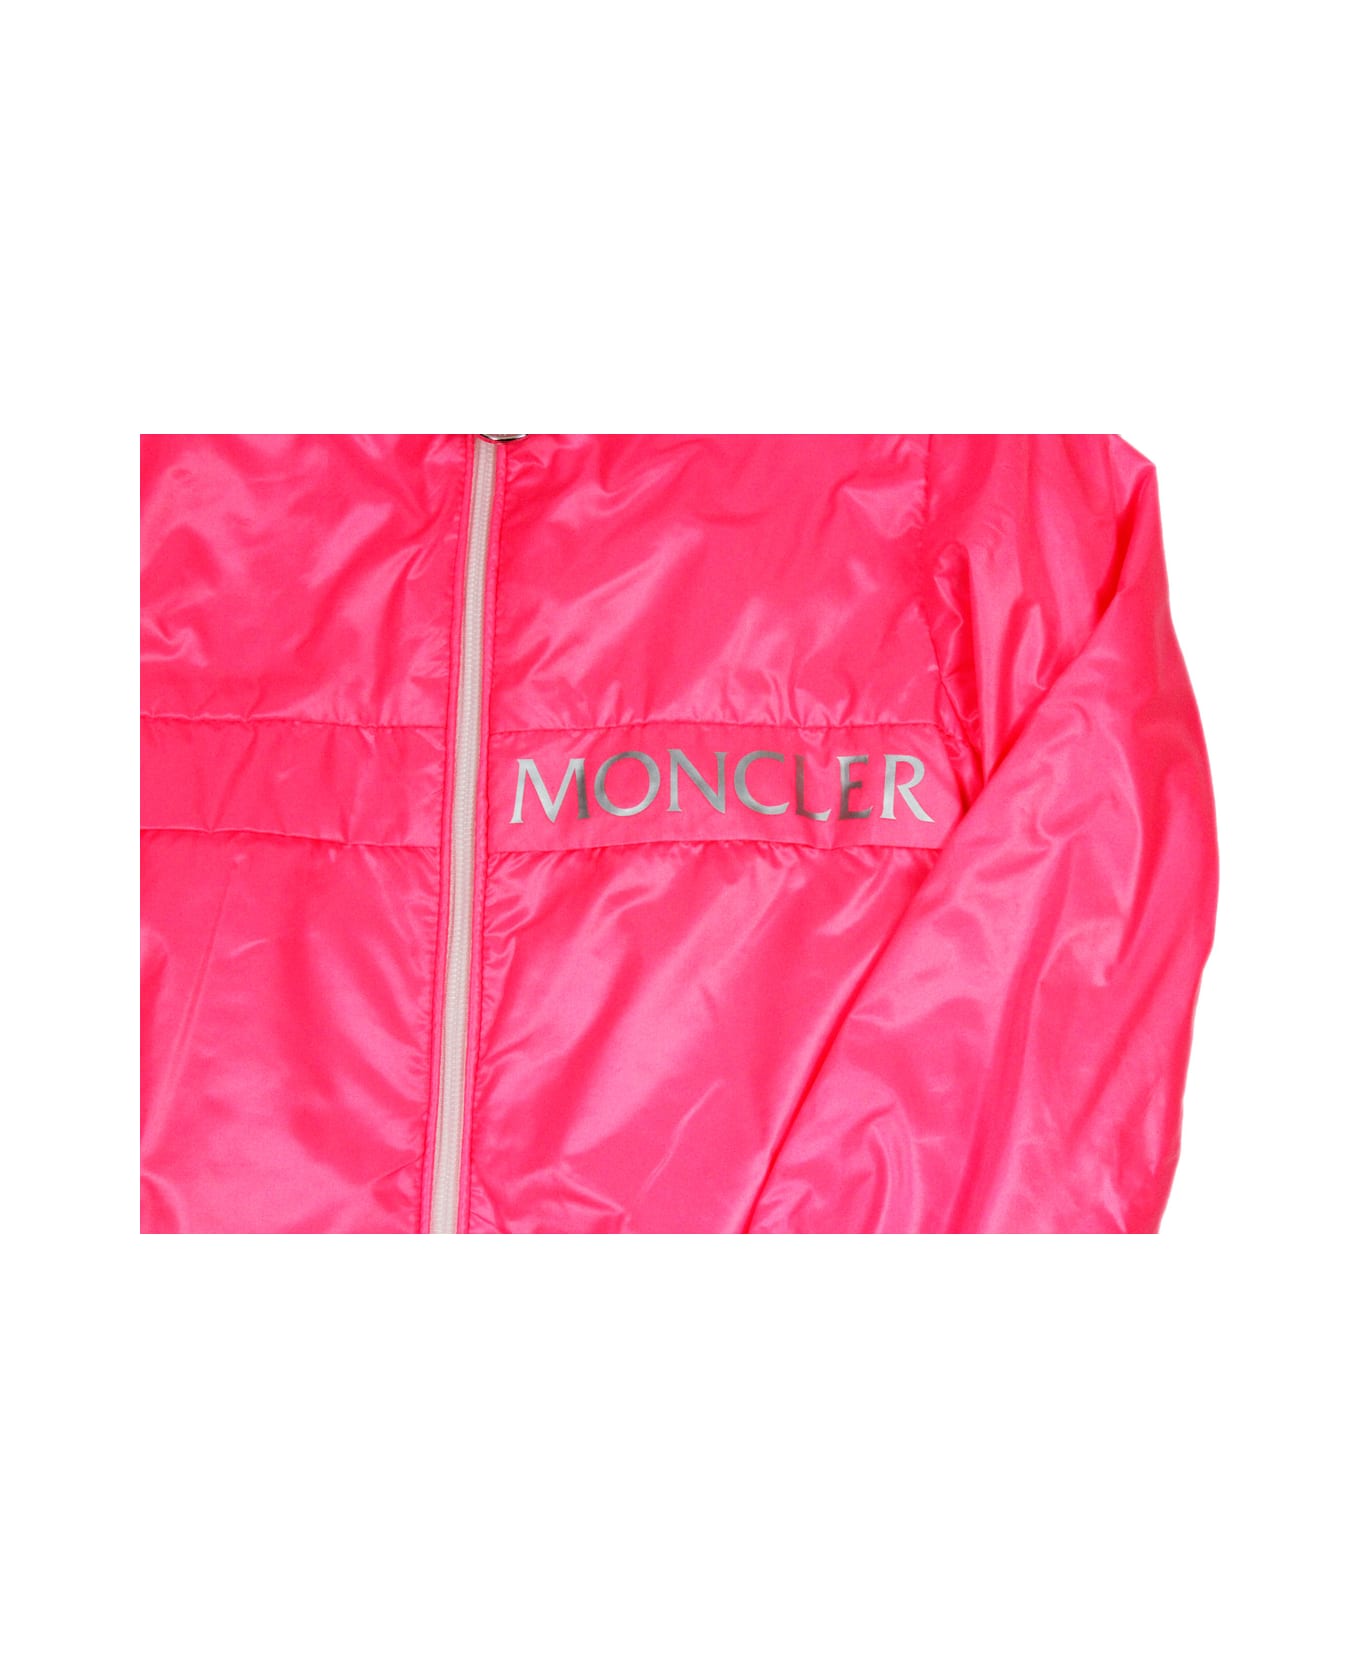 Moncler Admeta Windproof Jacket With Hood And Zip In Nylon And Cotton Inside And With Writing On The Front - Fucsia コート＆ジャケット